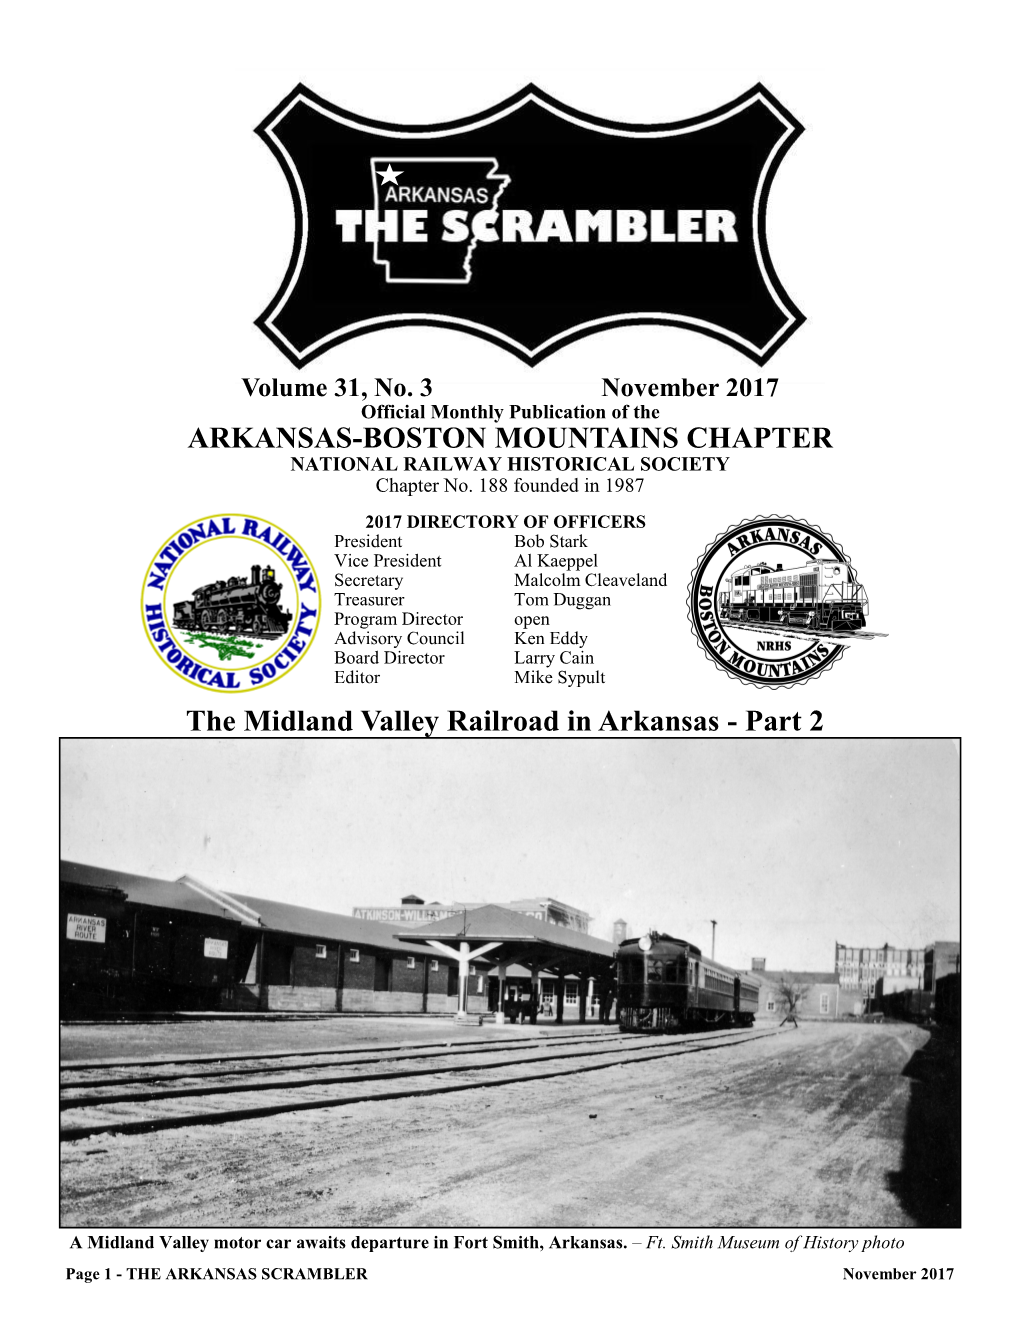 The Midland Valley Railroad in Arkansas - Part 2